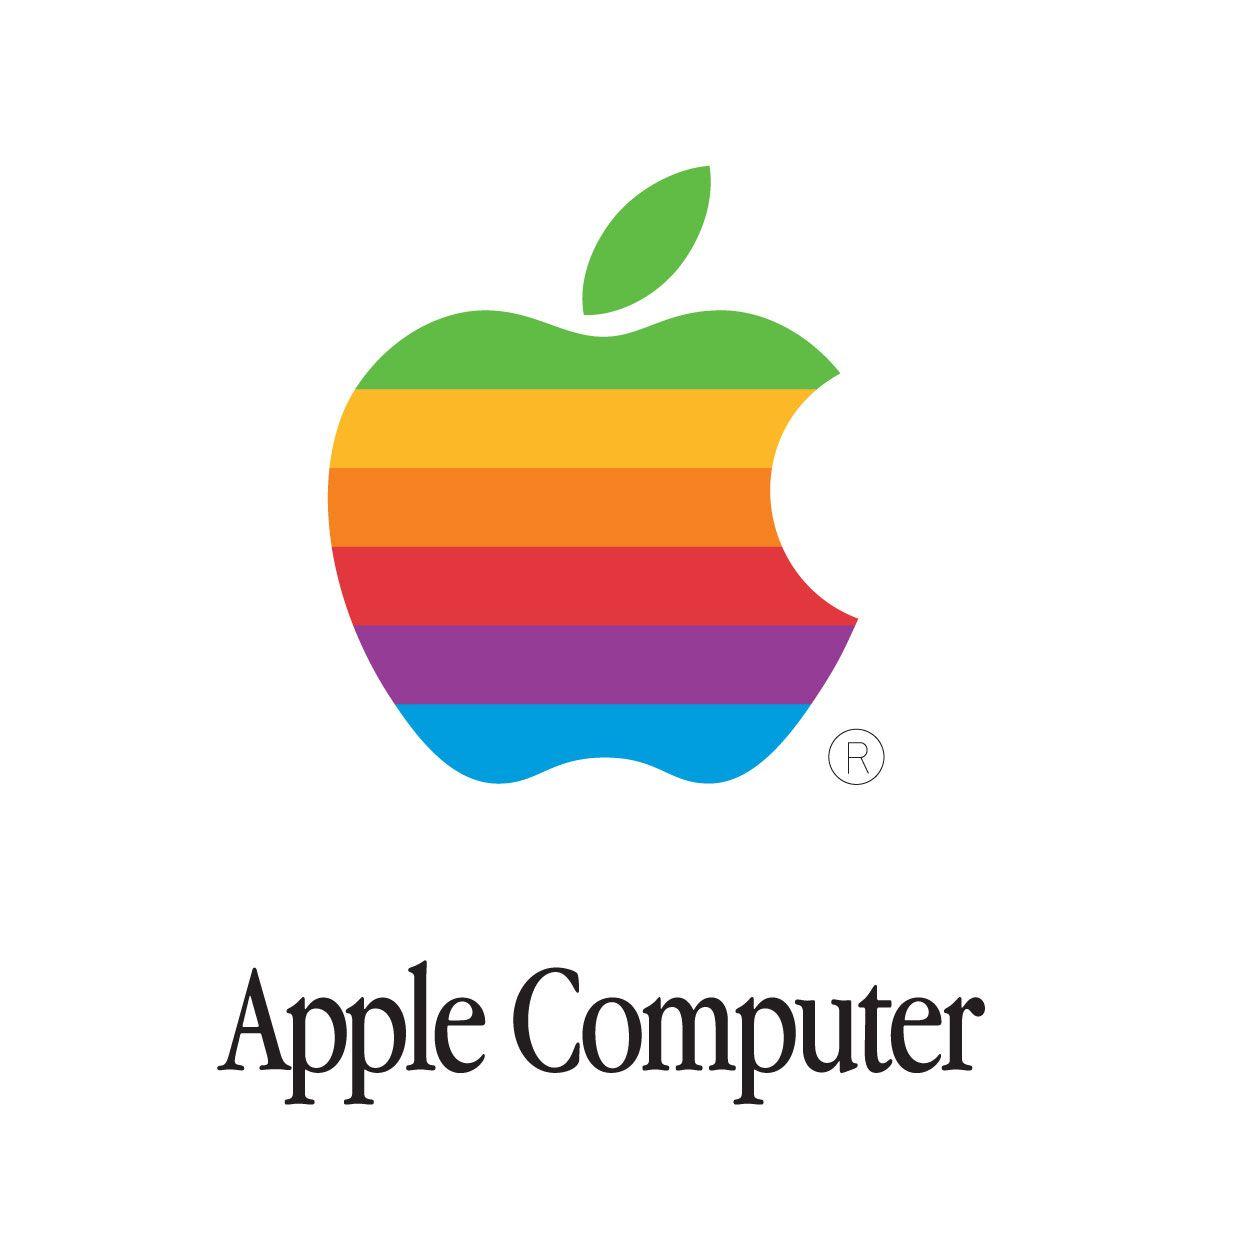 New Apple Computers Logo - Old-Apple-Computer-Logo - The Technology Geek